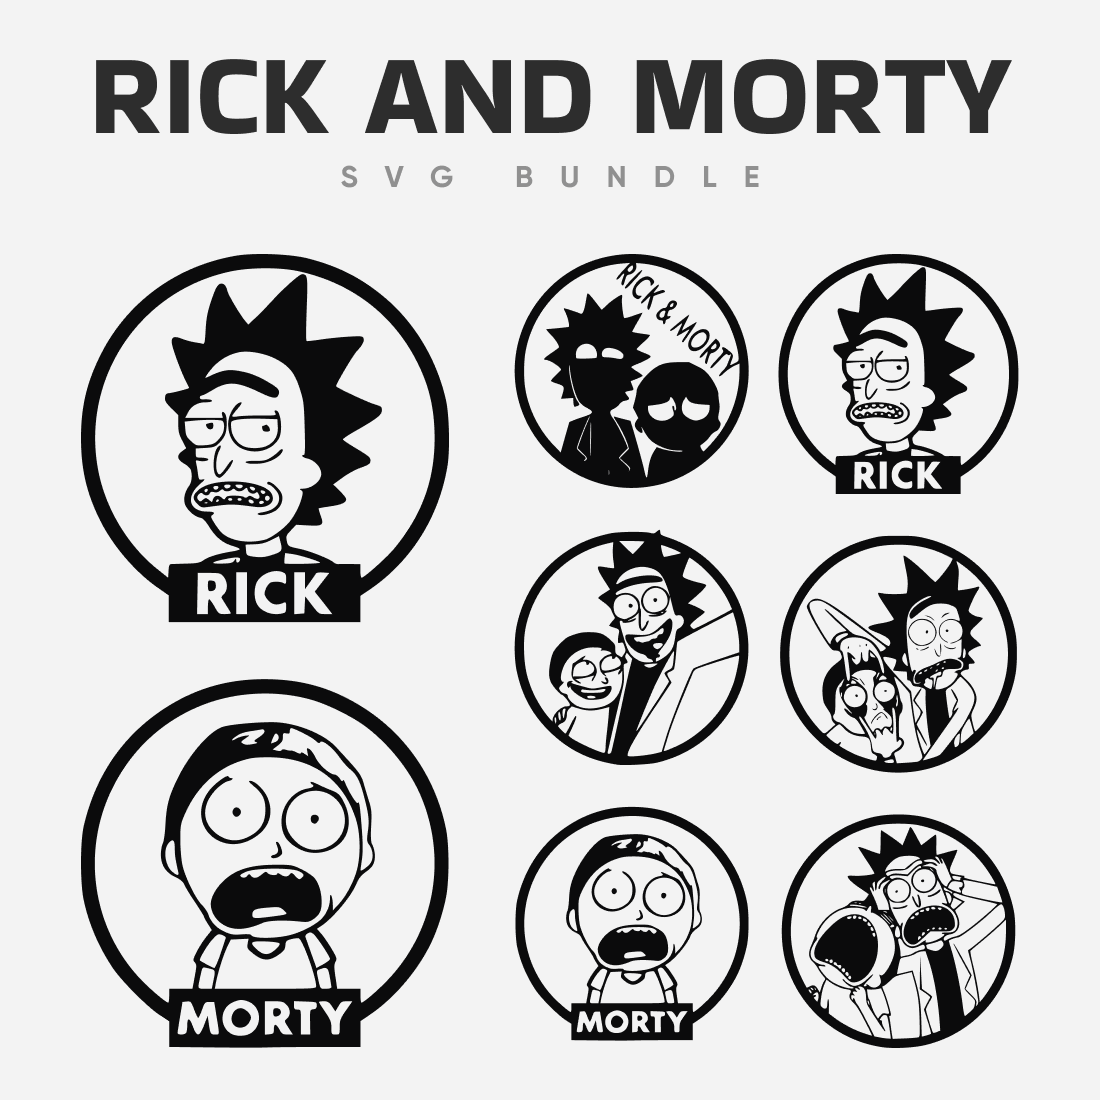 Two round large images with Rick and separately with Morty and six images with a plot from the Rick and Morty comedy series.